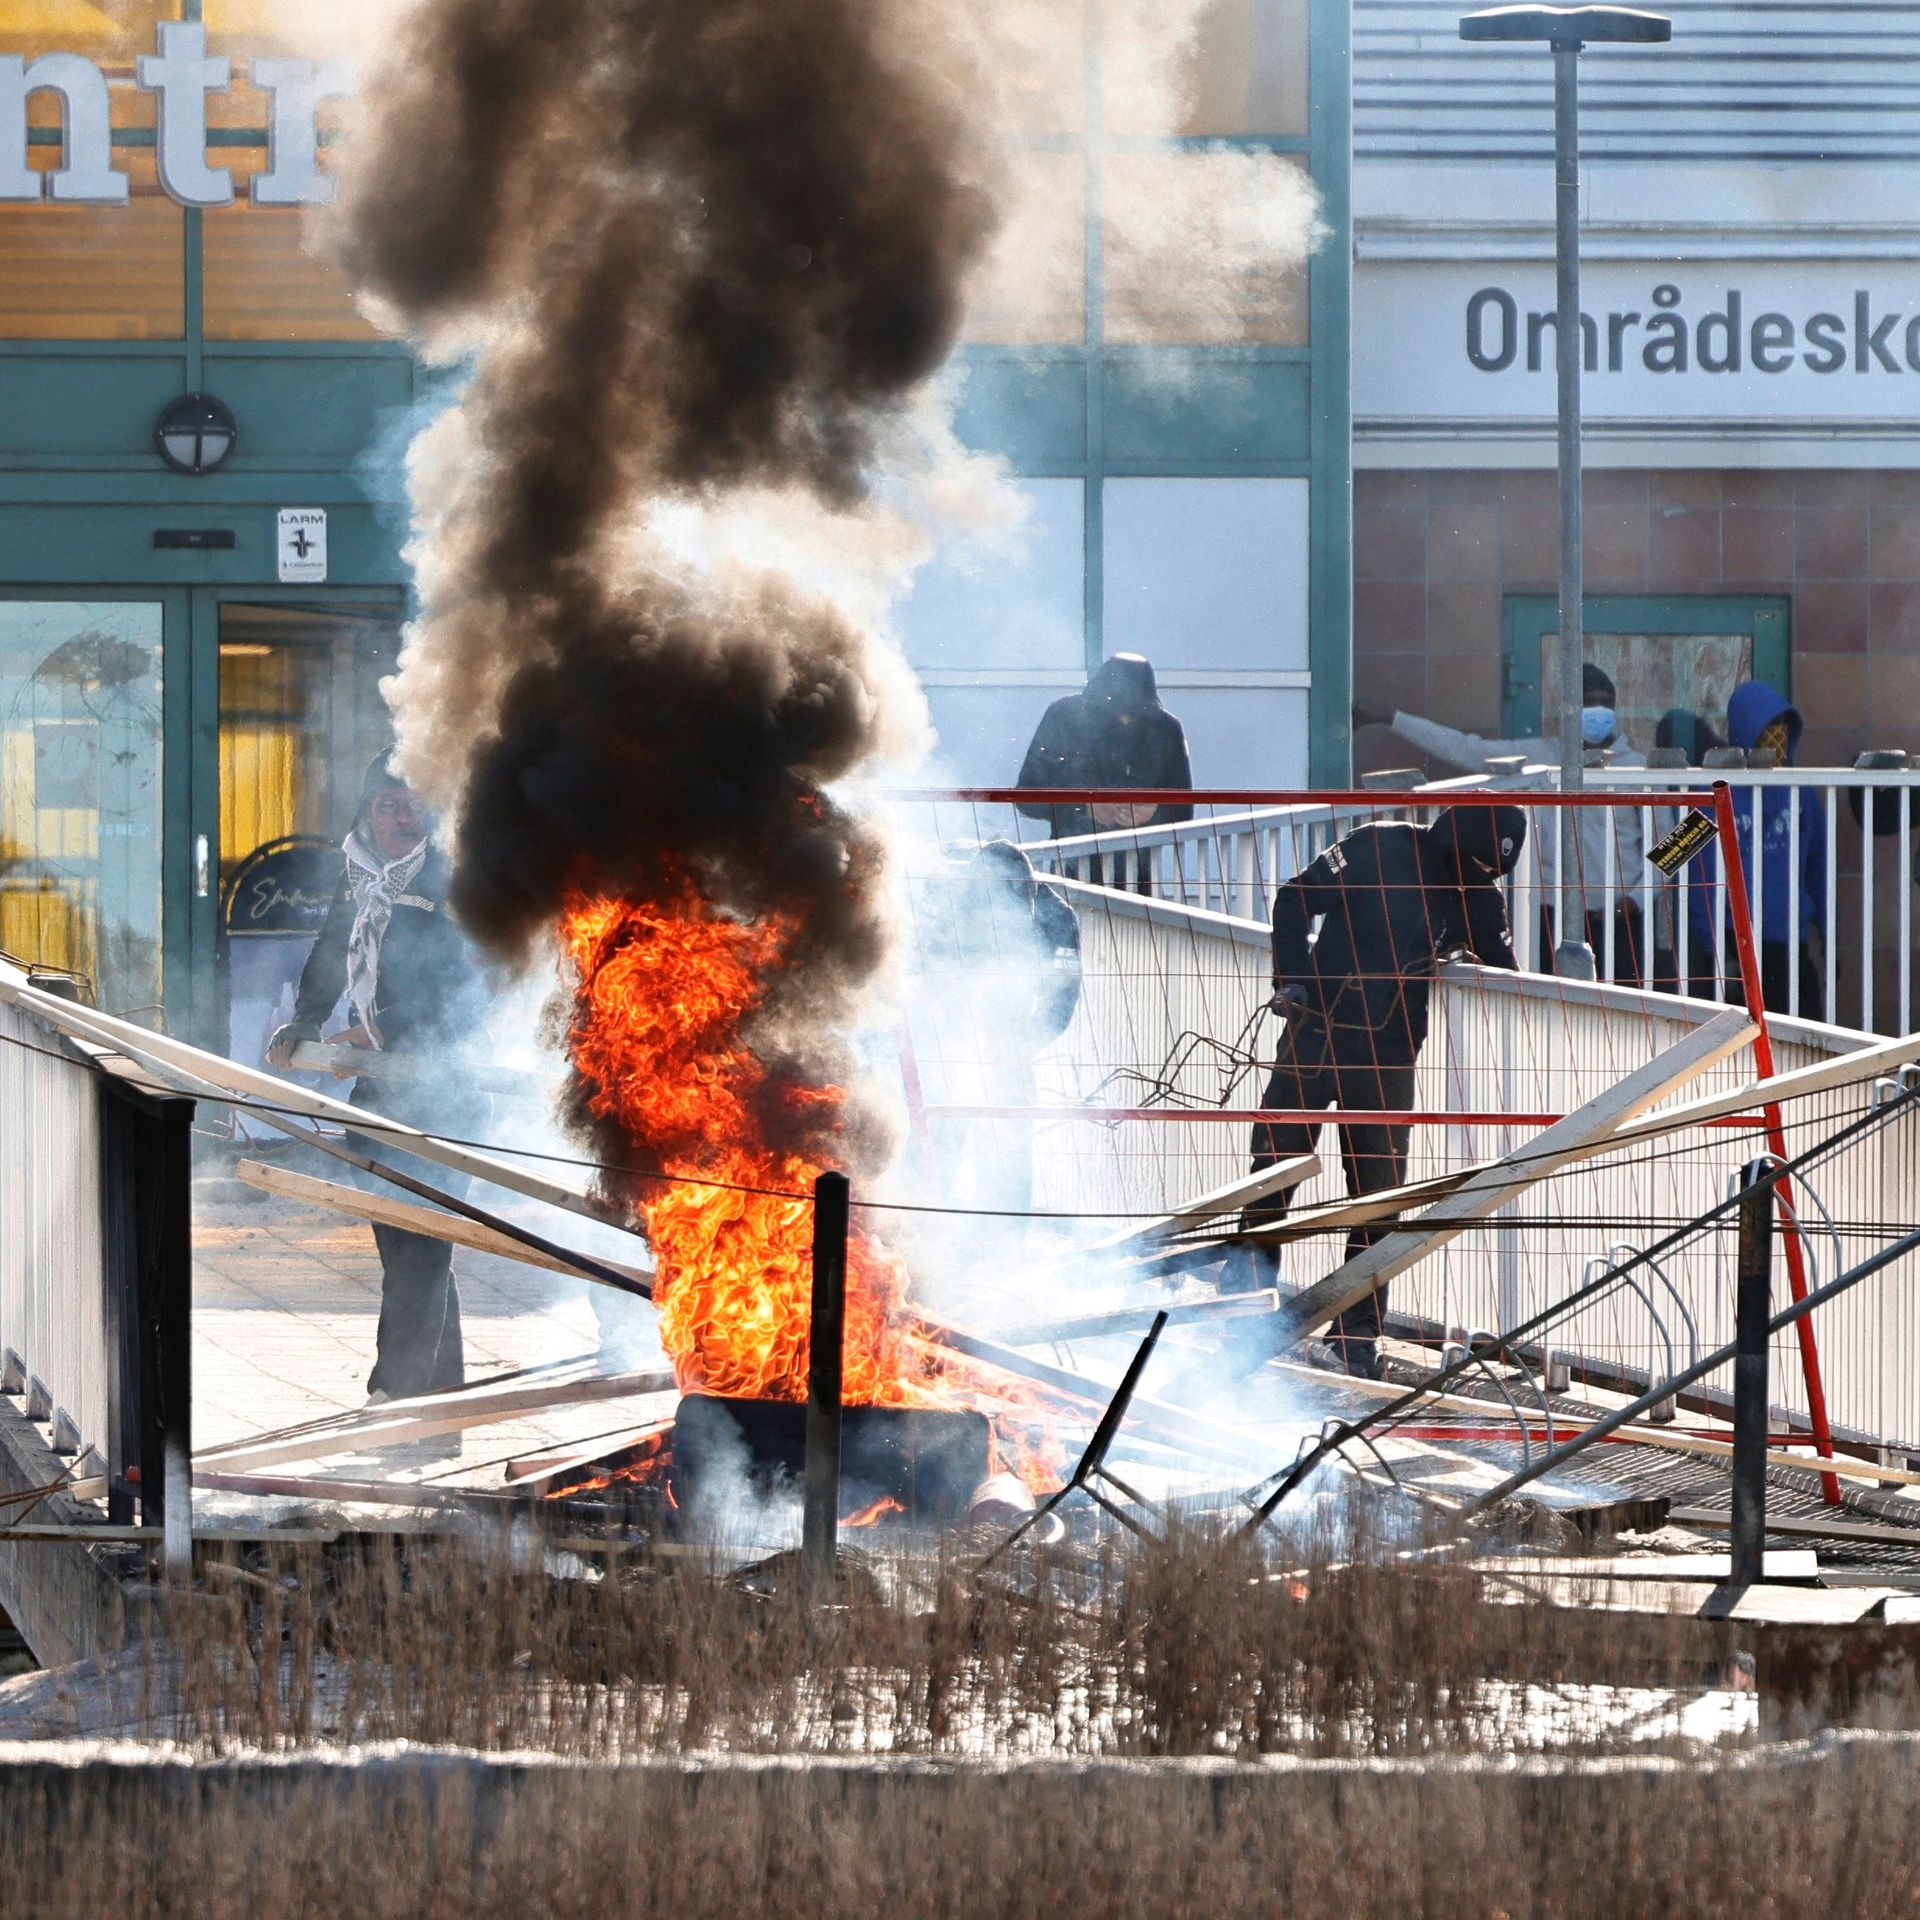  Protesters burn a barricade at the entrance to a shopping center during rioting in Norrkoping, Sweden on April 17.